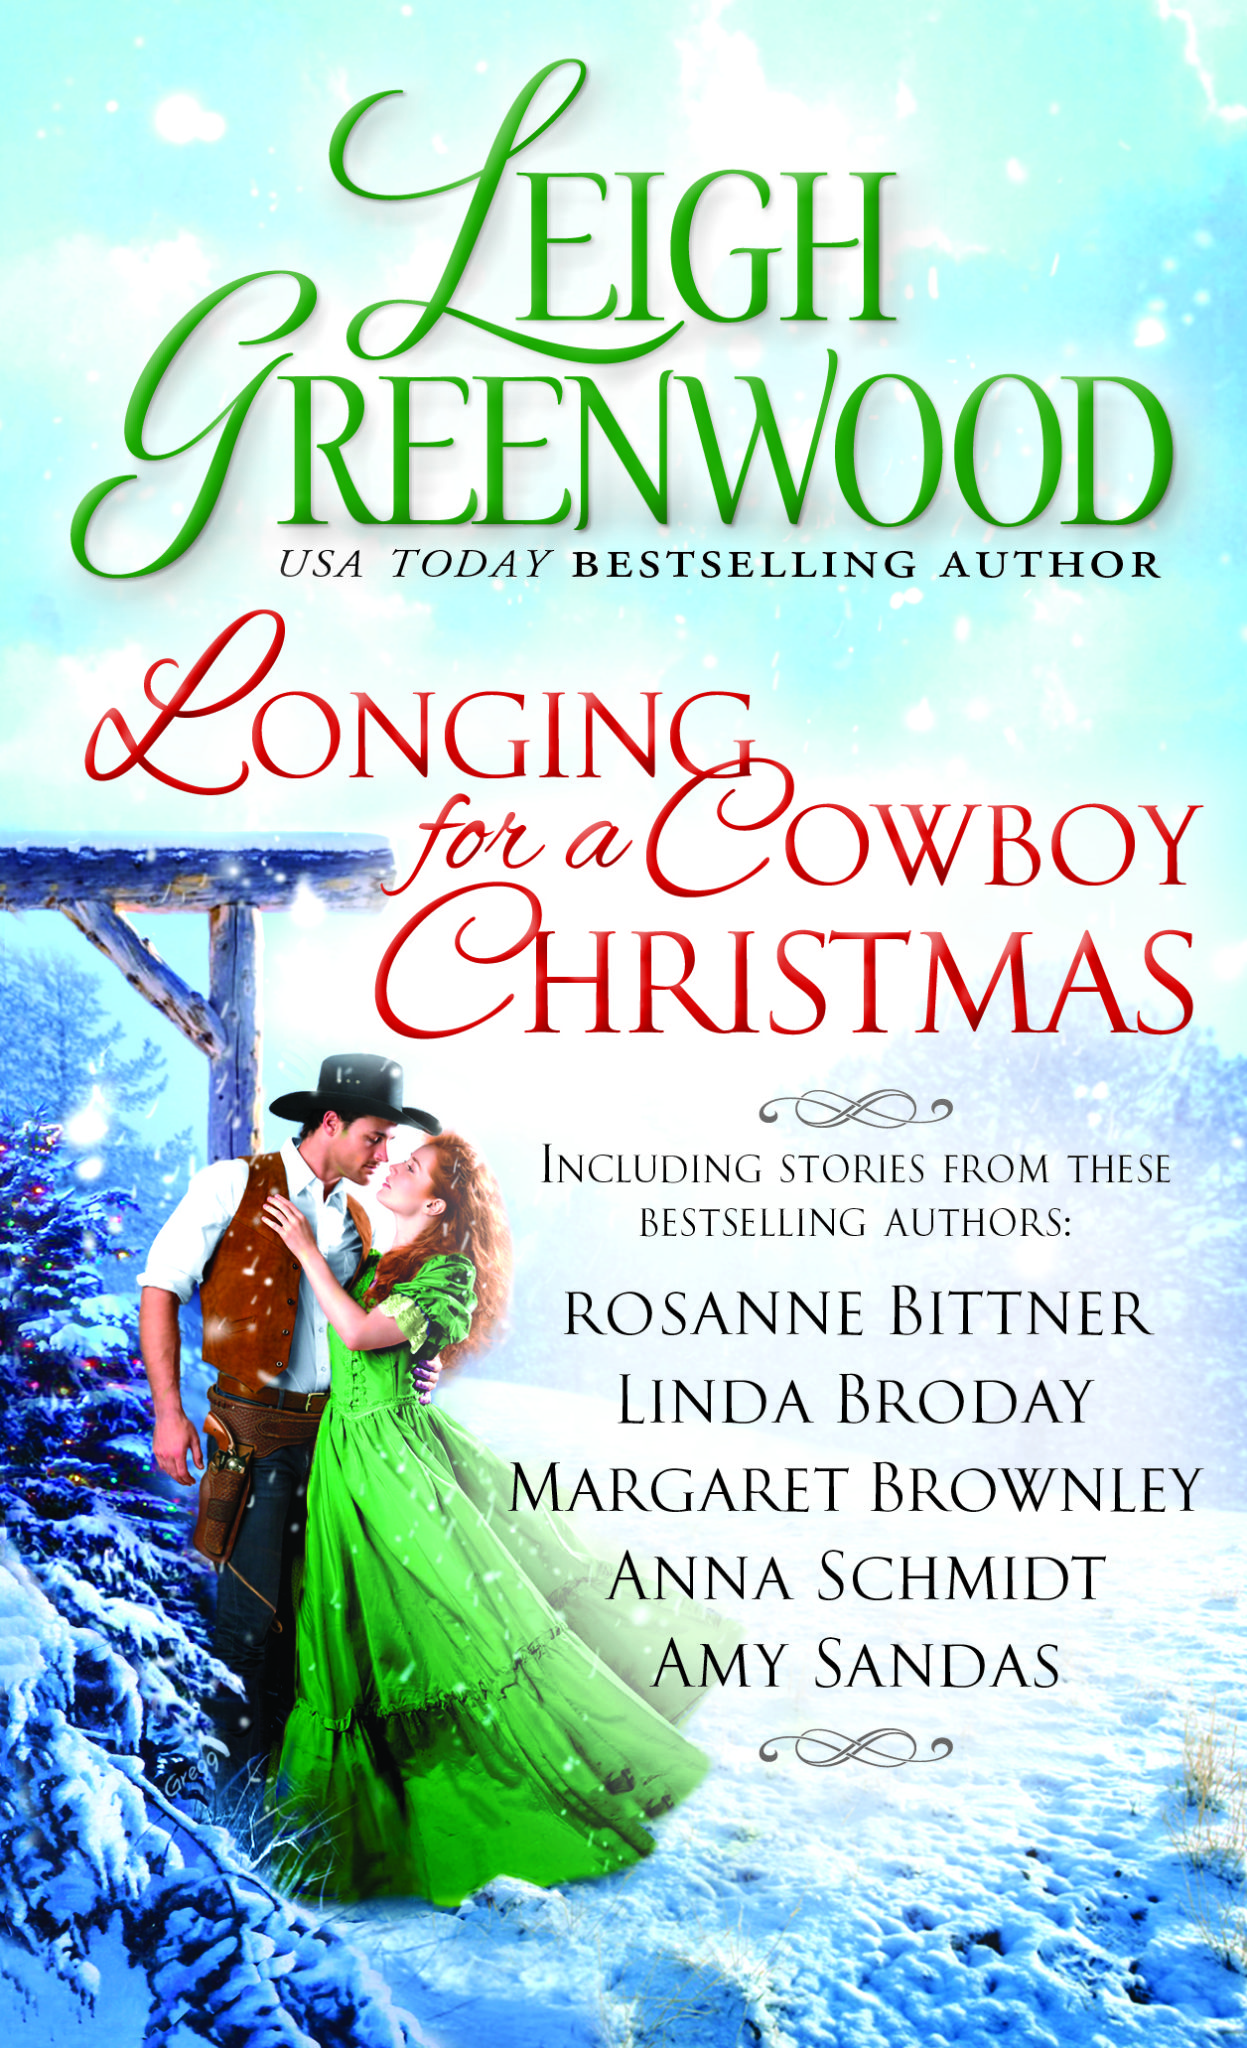 https://chapterbreak.net/wp-content/uploads/2019/10/Cover-Hi-Res-Longing-for-a-Cowboy-Christmas.jpg